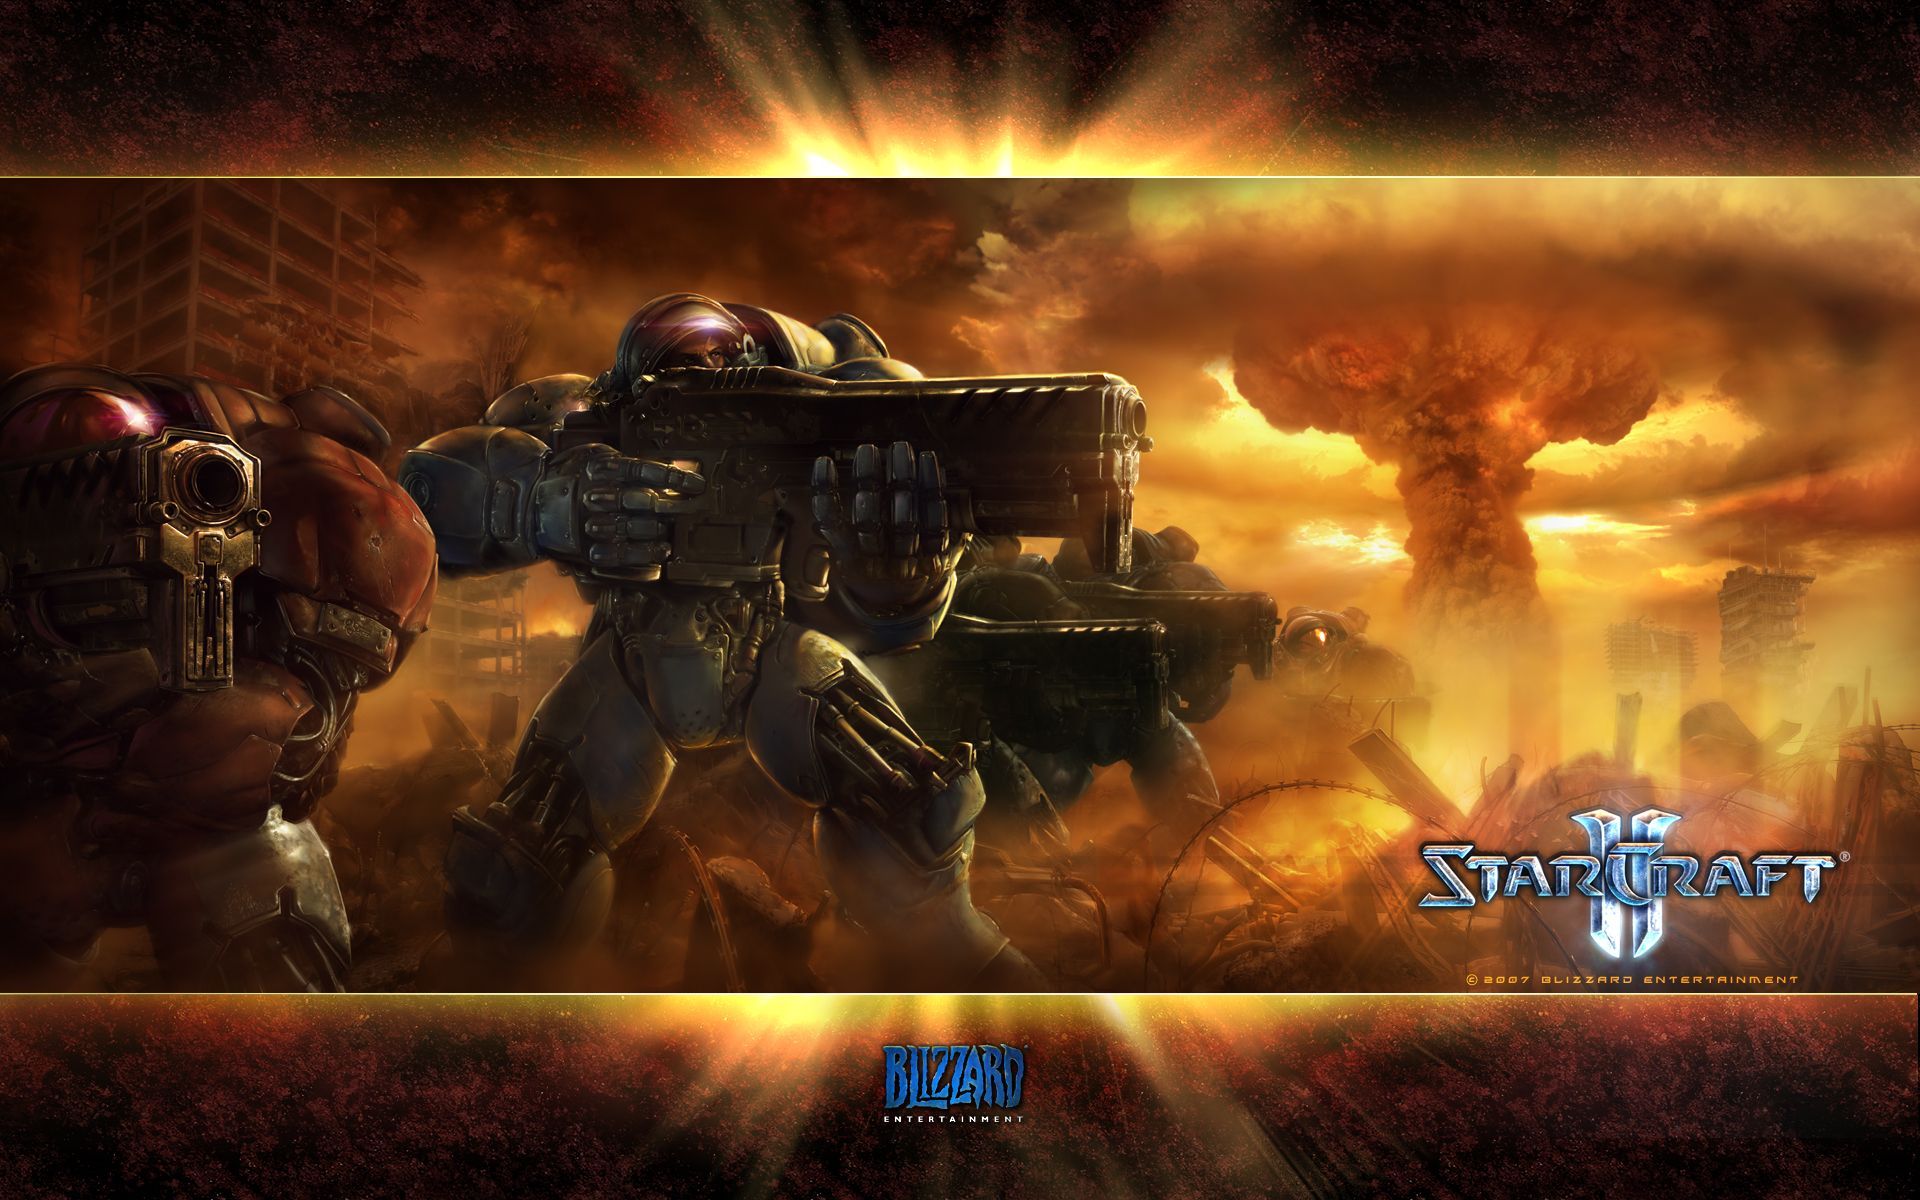 Starcraft 2 | Free Desktop Wallpapers for HD, Widescreen and Mobile